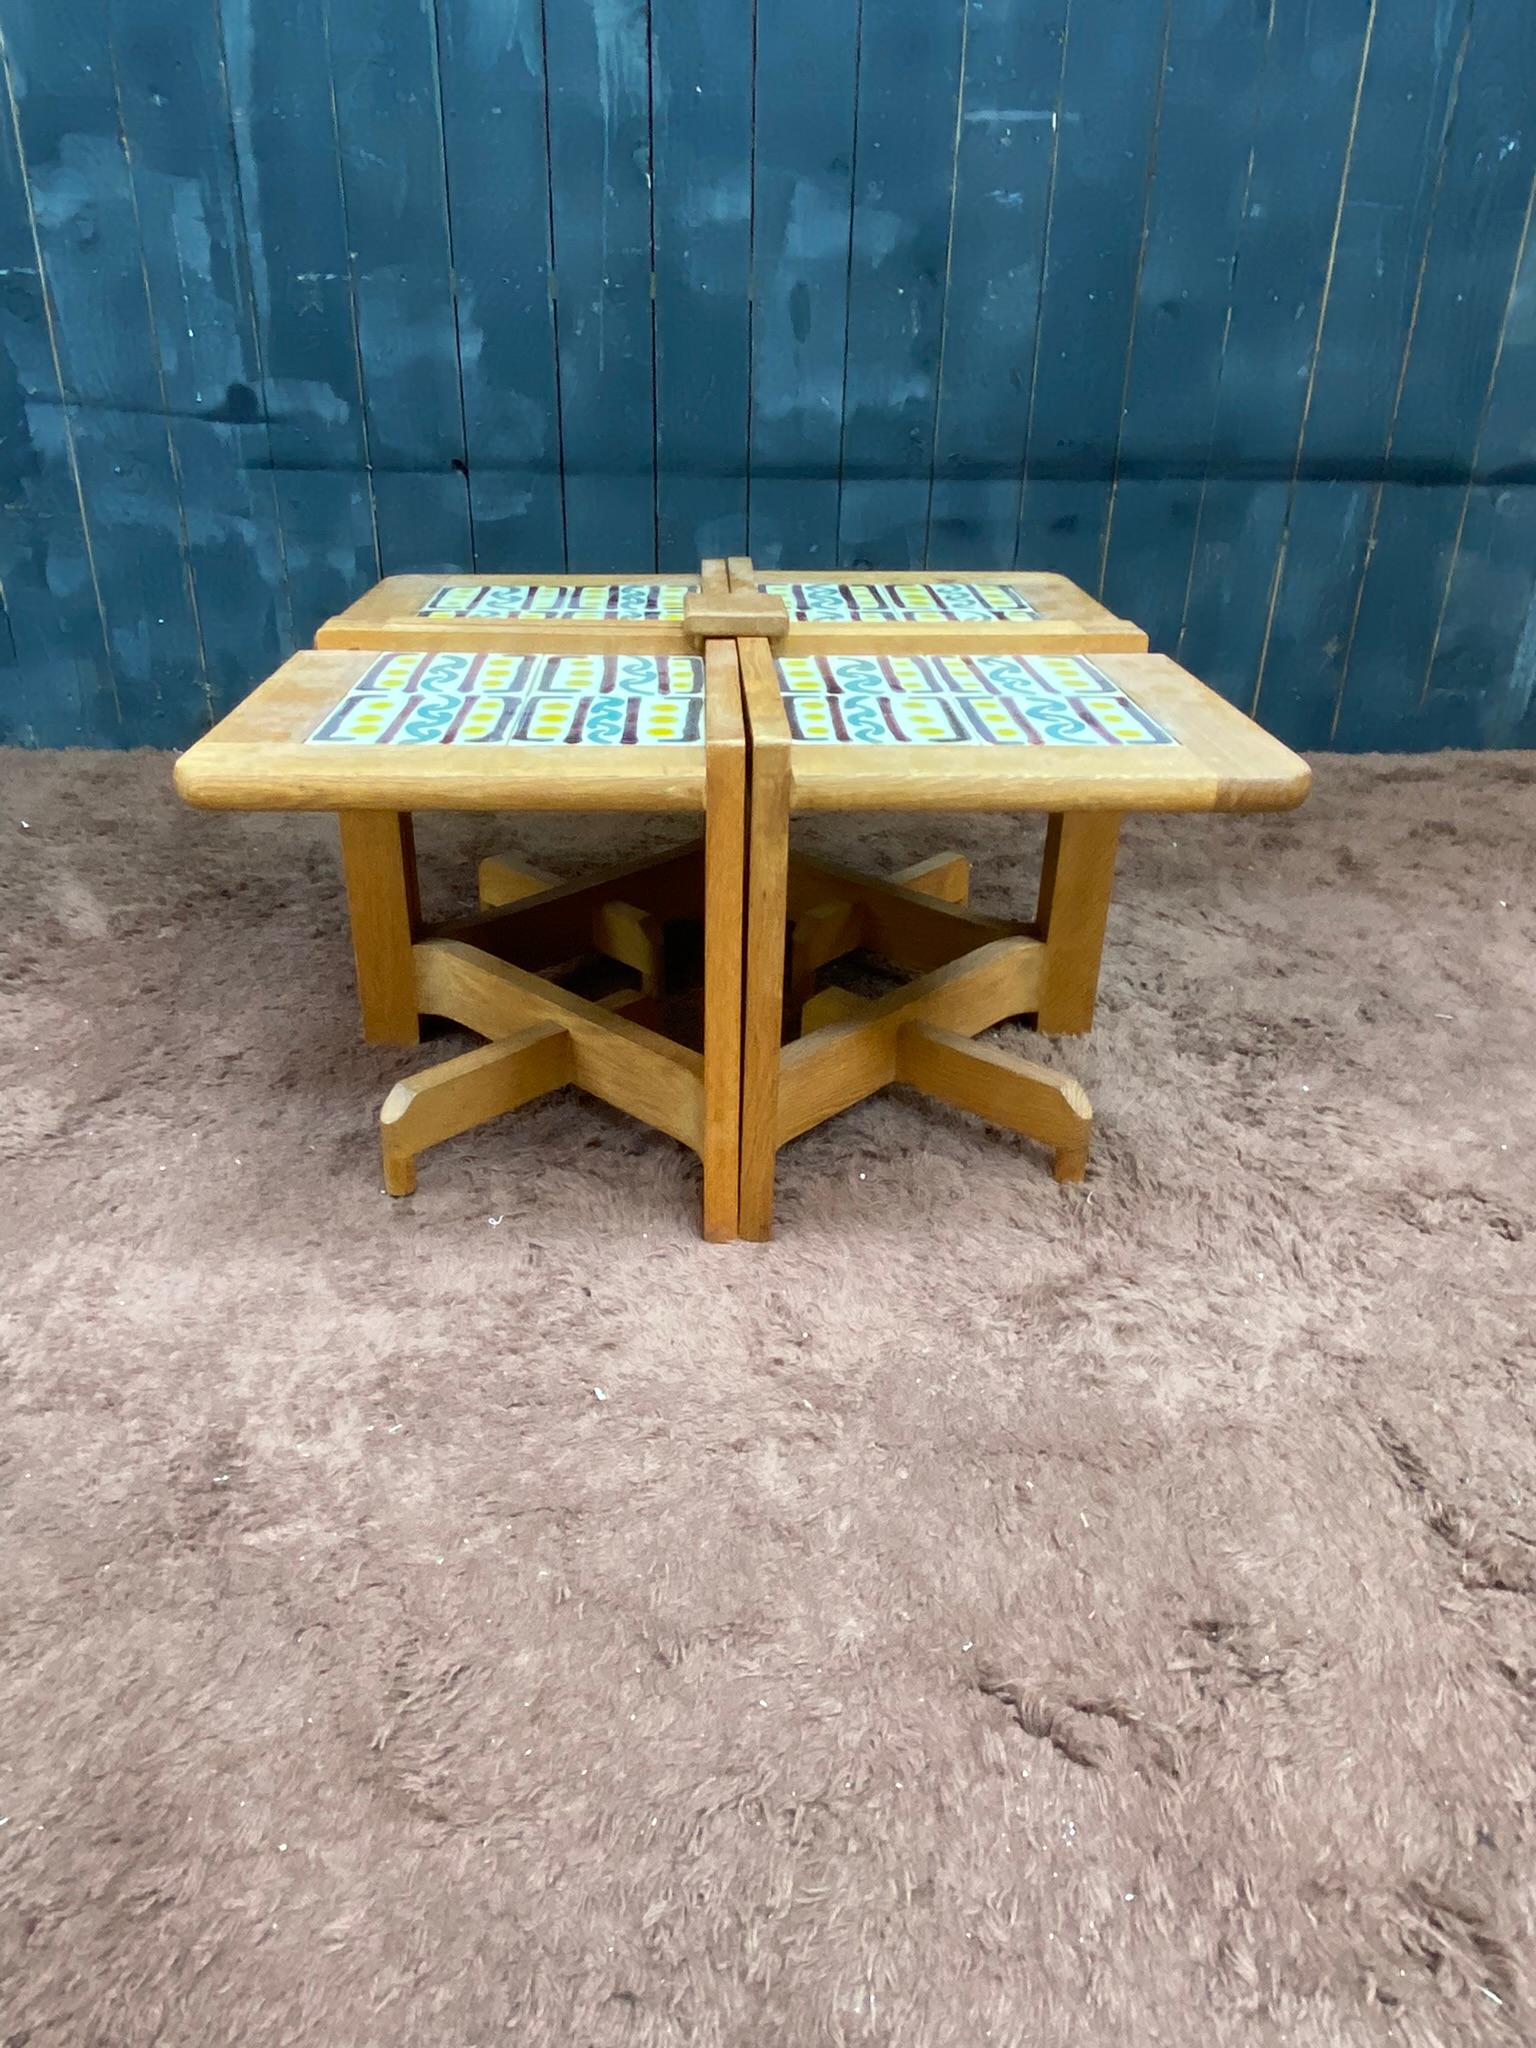 Guillerme et Chambron, rare oak and ceramic coffee table composed of 4 small tables joined together and assembled by a piece of wood
each small table measures 17.32